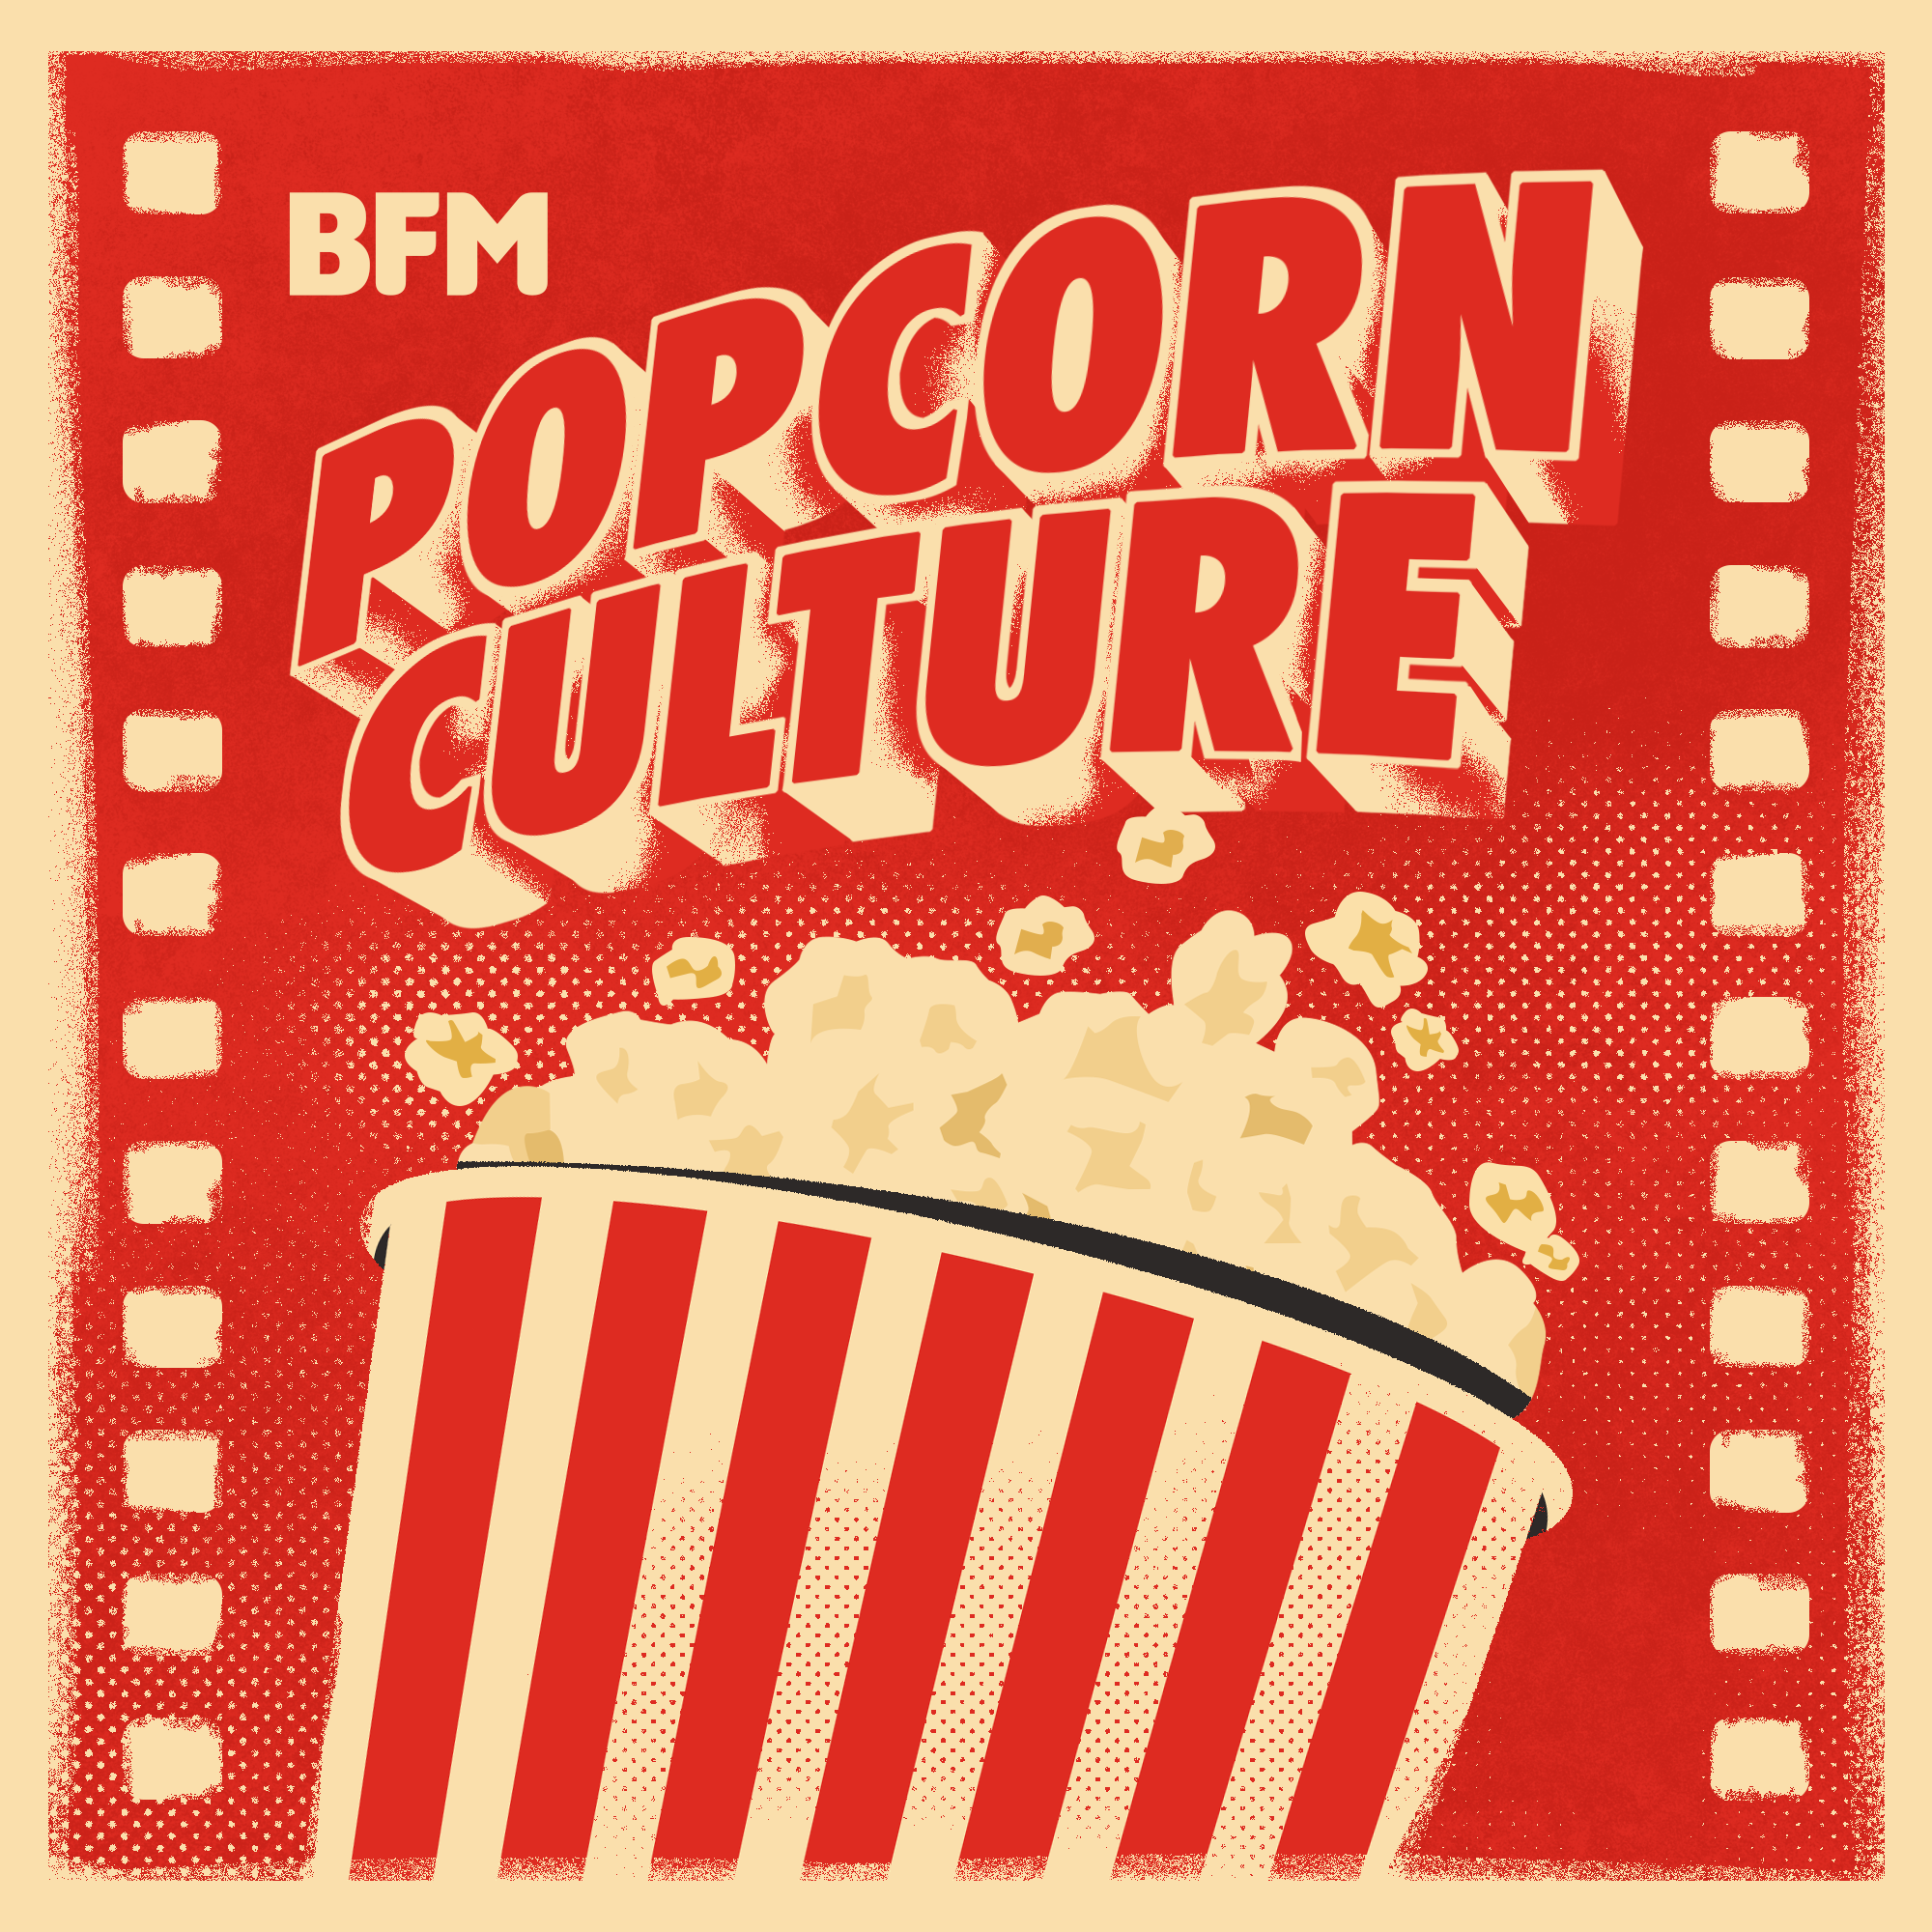 Popcorn Culture - Review: Five Nights At Freddy's